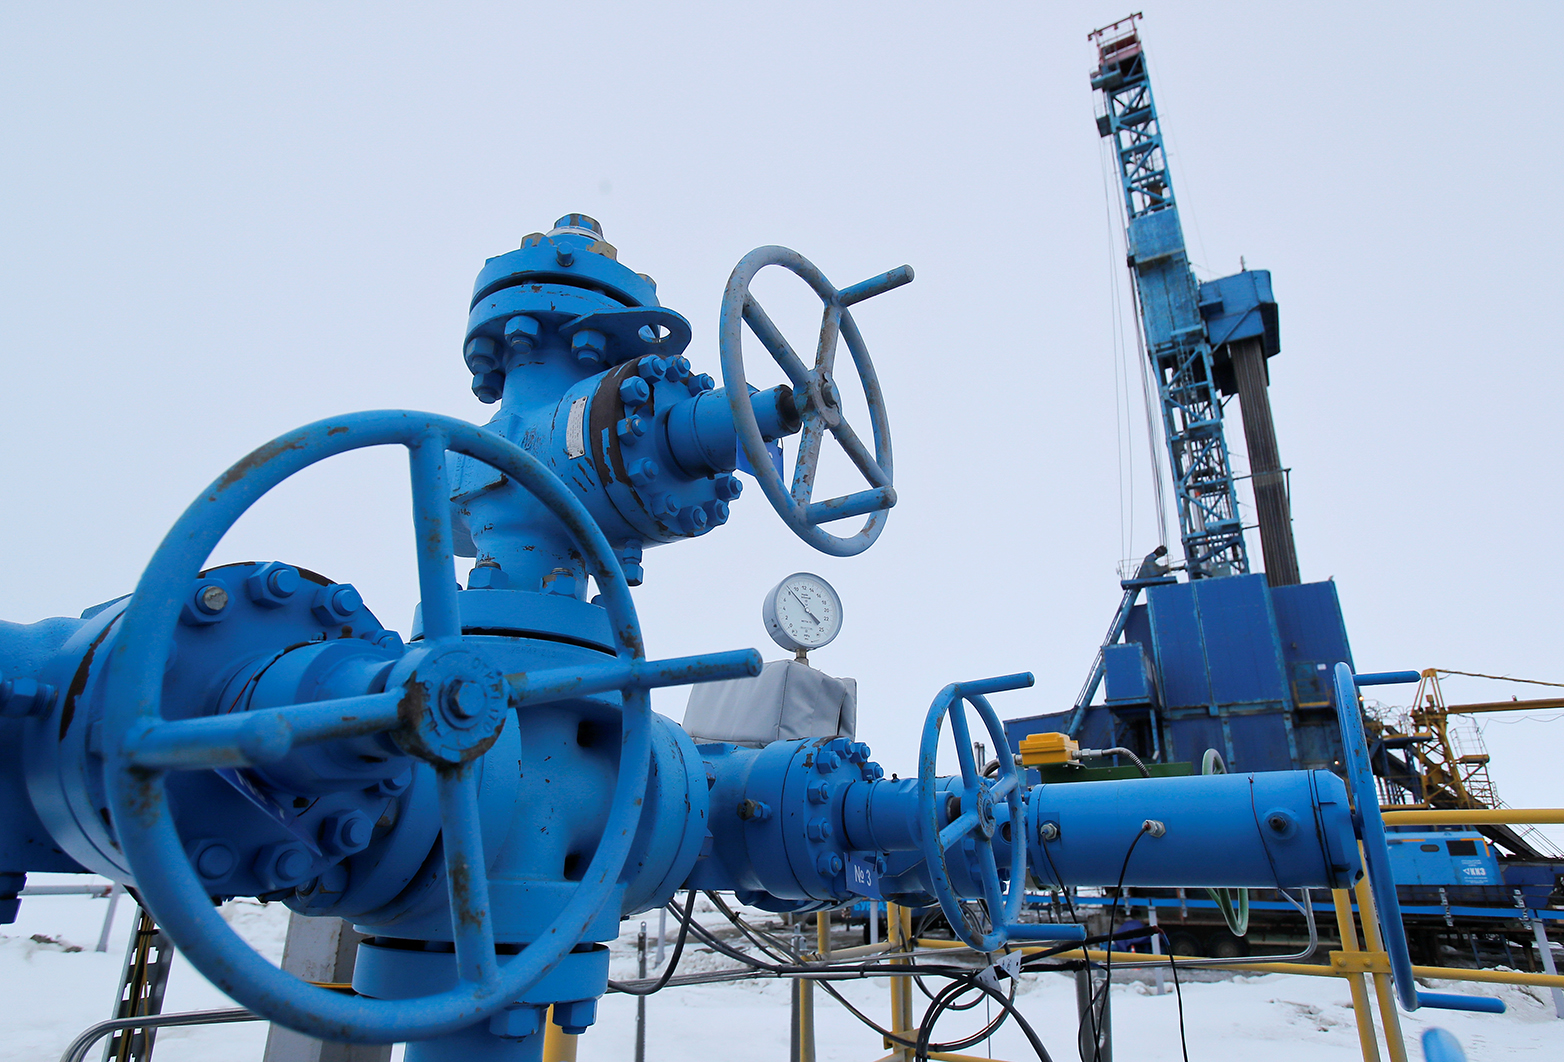 Valves near a drilling rig, operated by Gazprom, at Bovanenkovo gas field on the Arctic Yamal peninsula